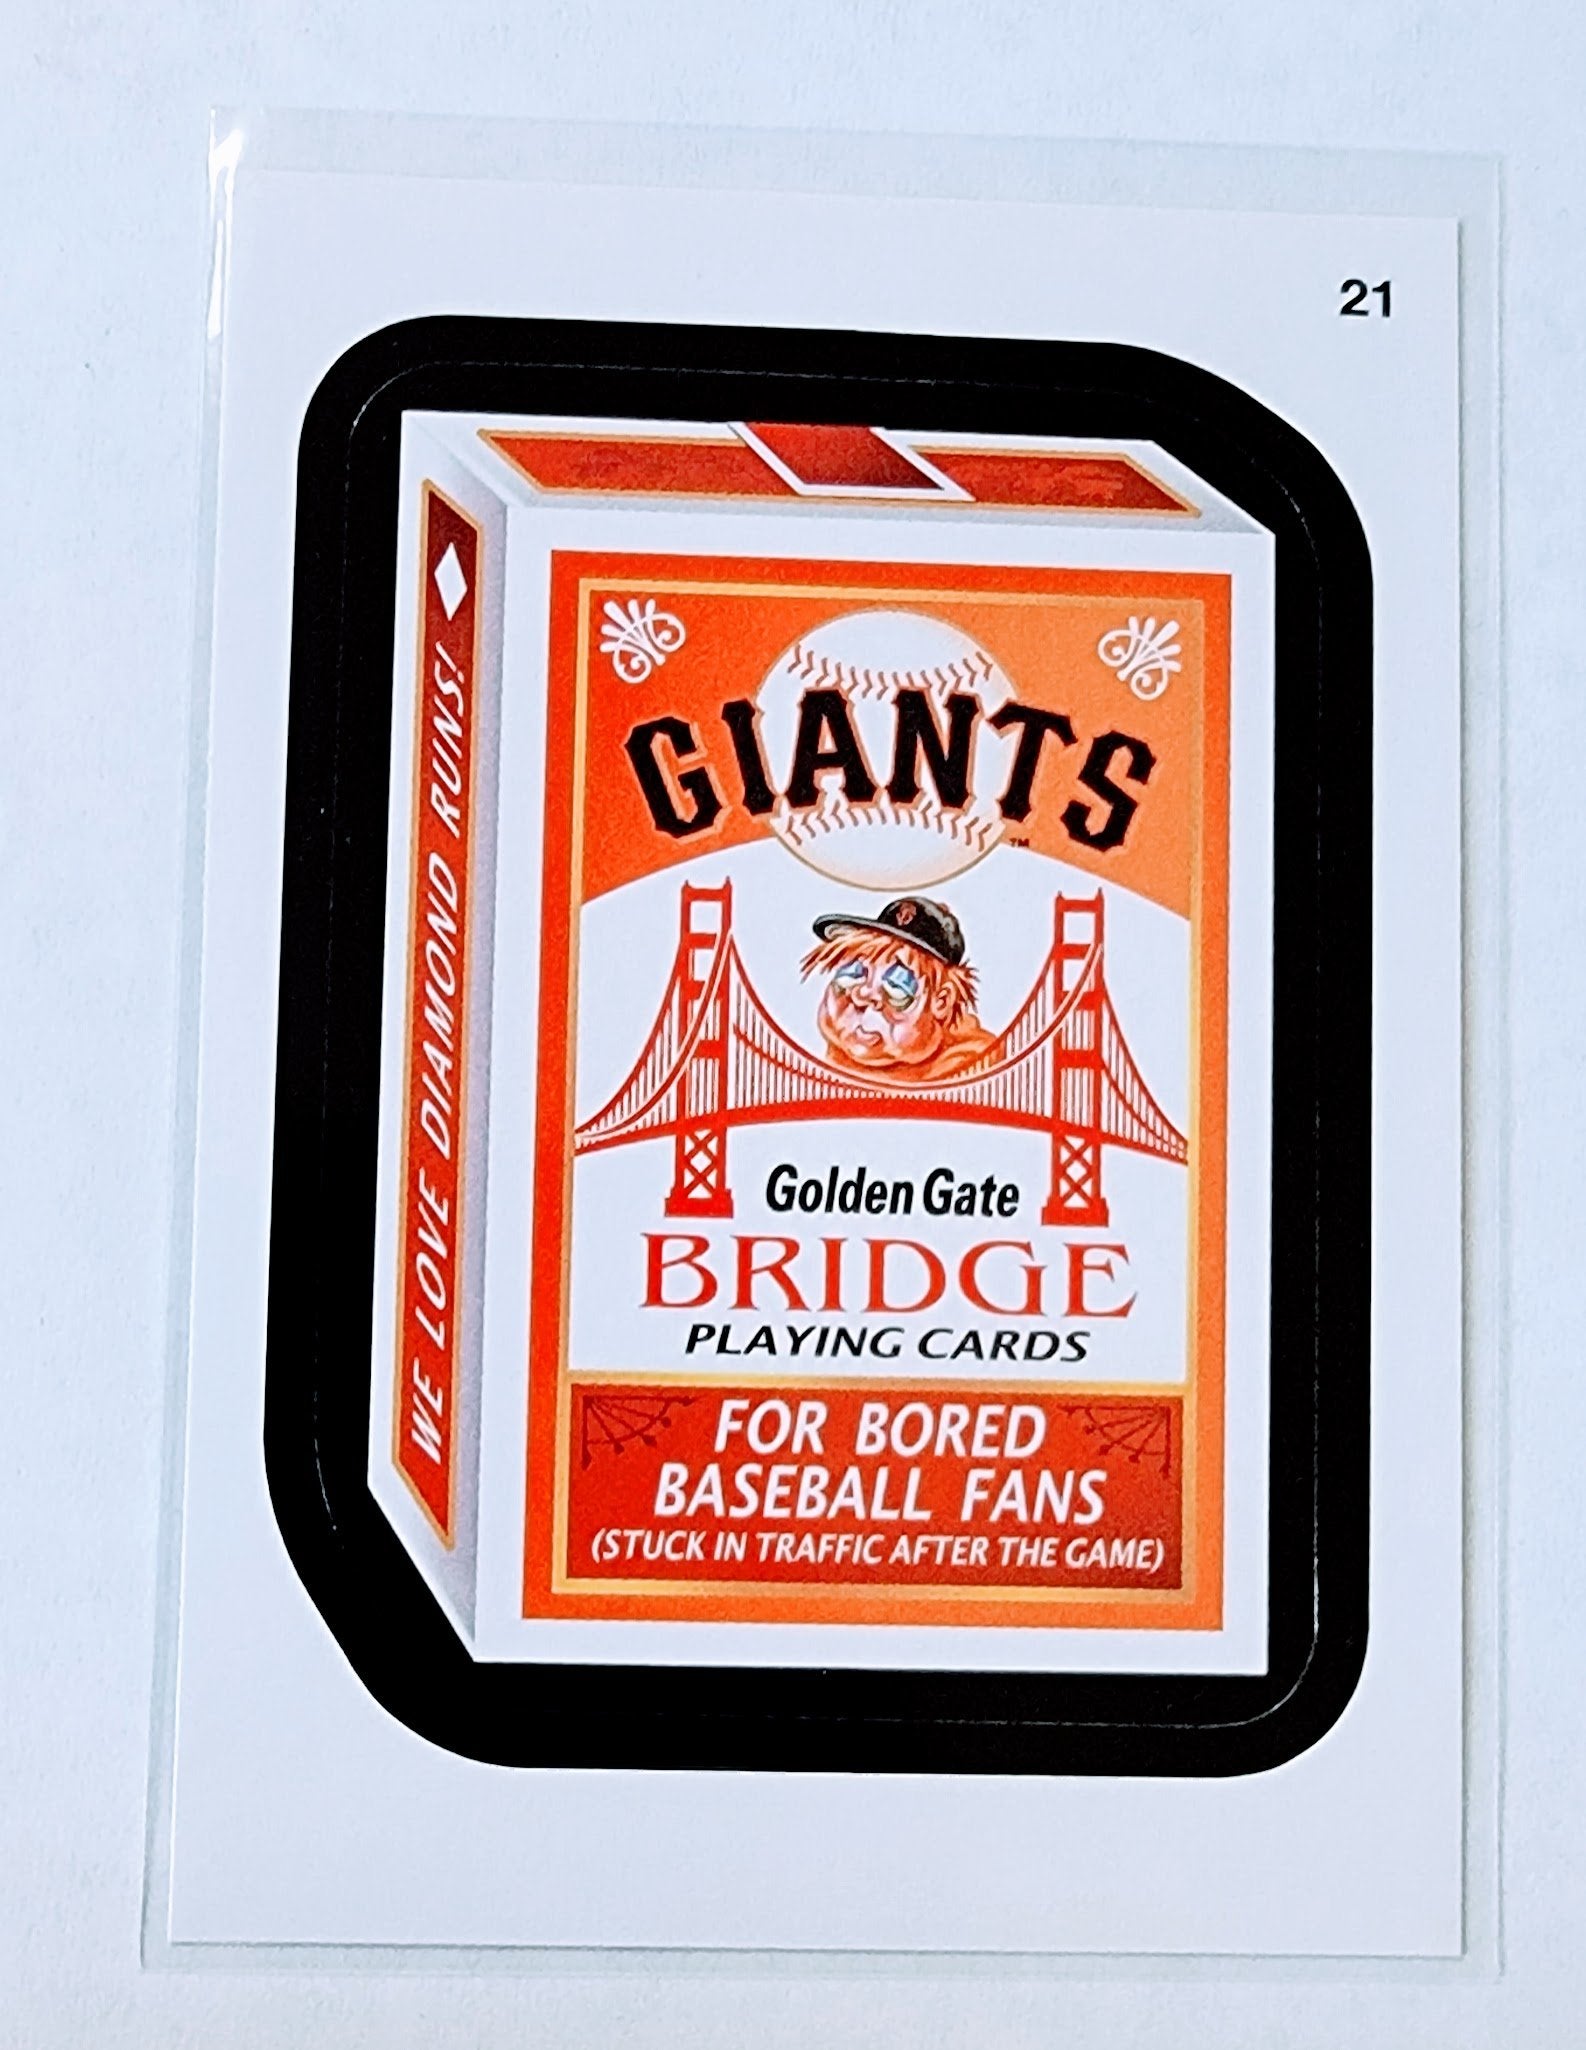 2016 Topps MLB Baseball Wacky Packages Giants Golden Gate Bridge Playing Cards Sticker Trading Card MCSC1 simple Xclusive Collectibles   